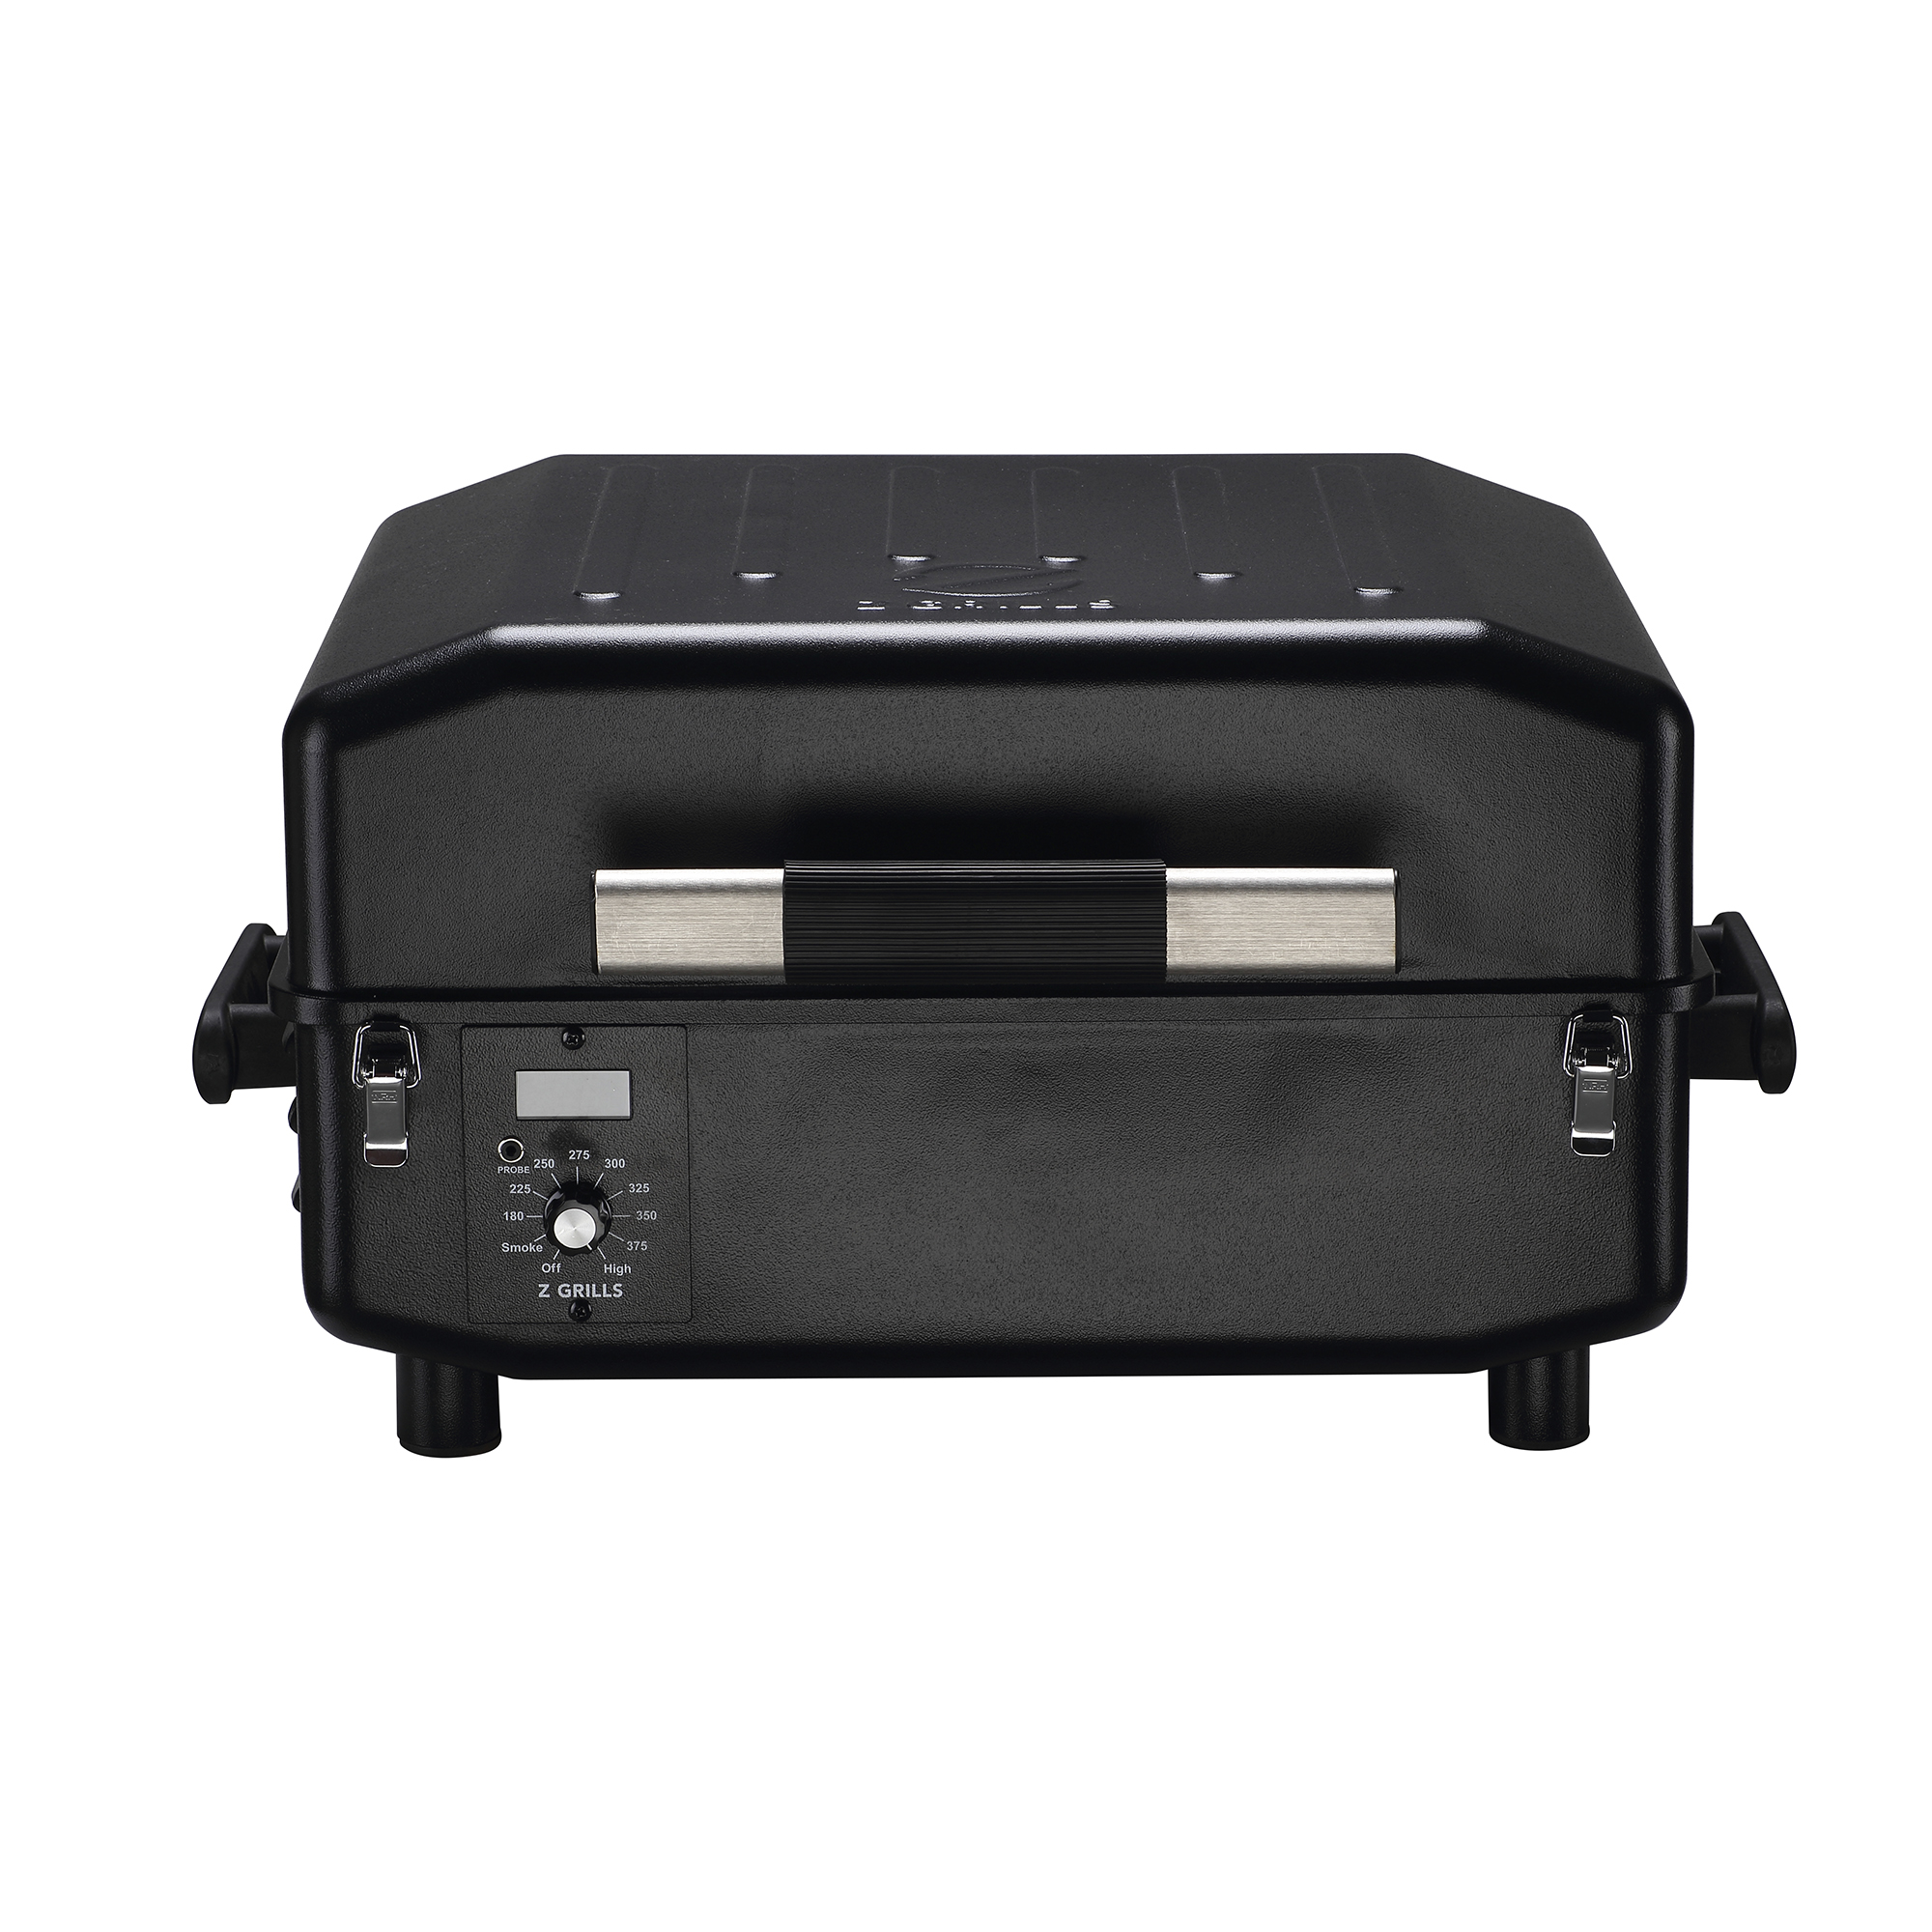 Z GRILLS ZPG-200A Portable Pellet Grill & Electric Smoker – Camping BBQ Combo with Auto Temperature Control - image 2 of 10